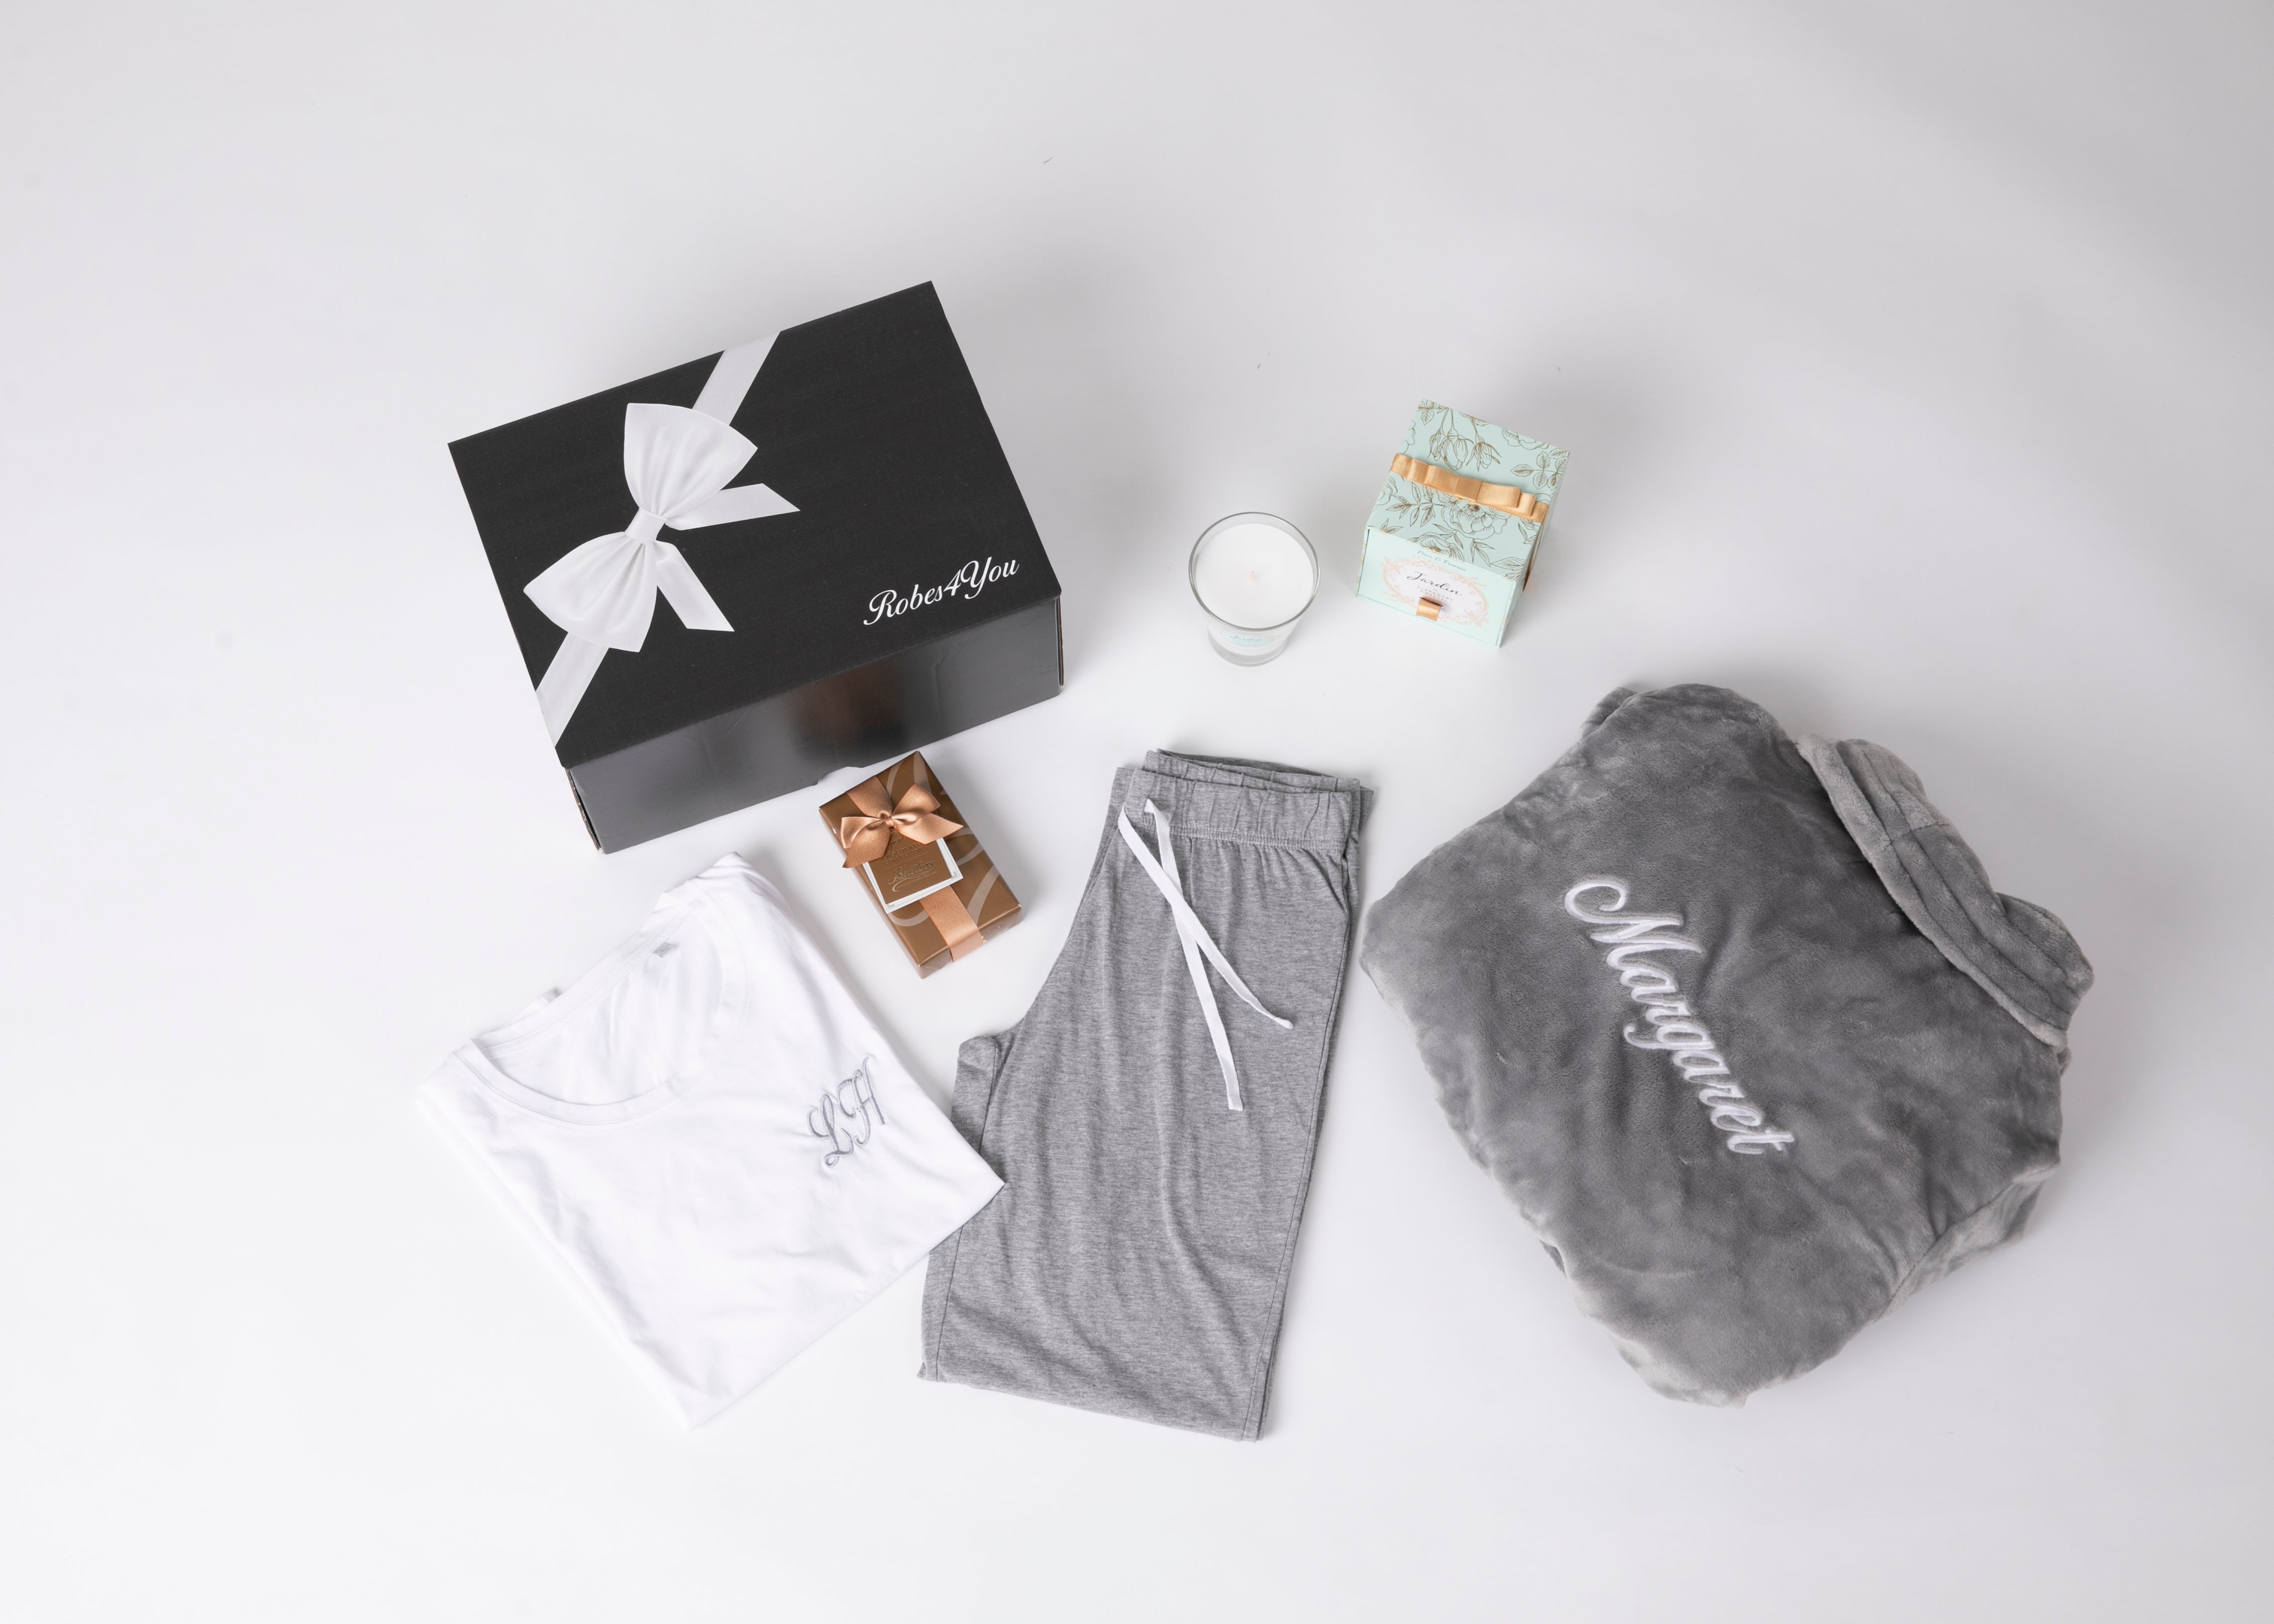 Luxurious soft fluffy  Robe Hamper with Cotton long pyjamas ,Chocolates and a Candle in a gift box